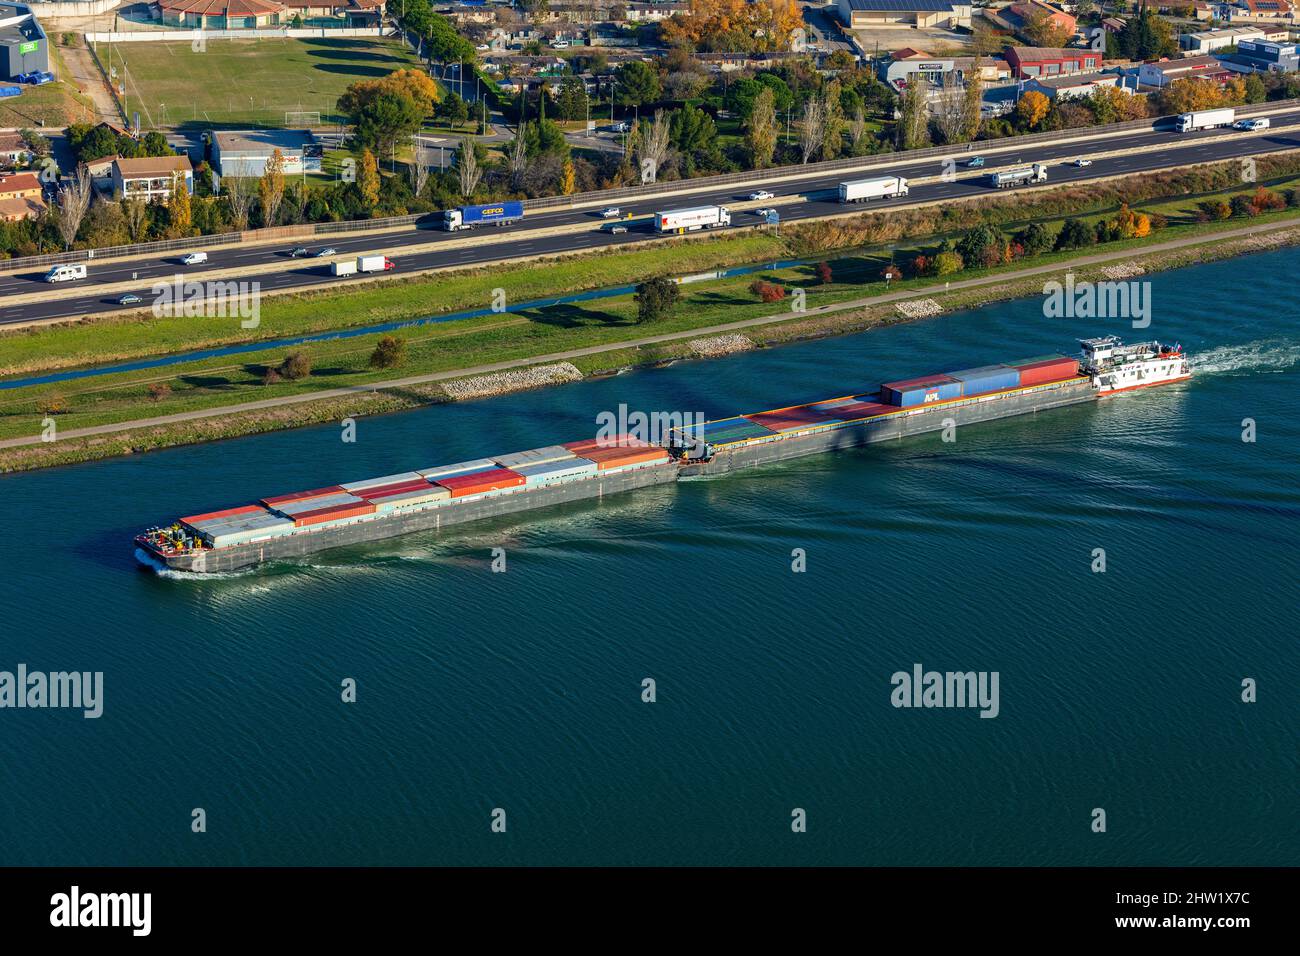 France, Vaucluse, Bollene, barge on Le Rhone, container transport, A7 Sun highway (aerial view) Stock Photo